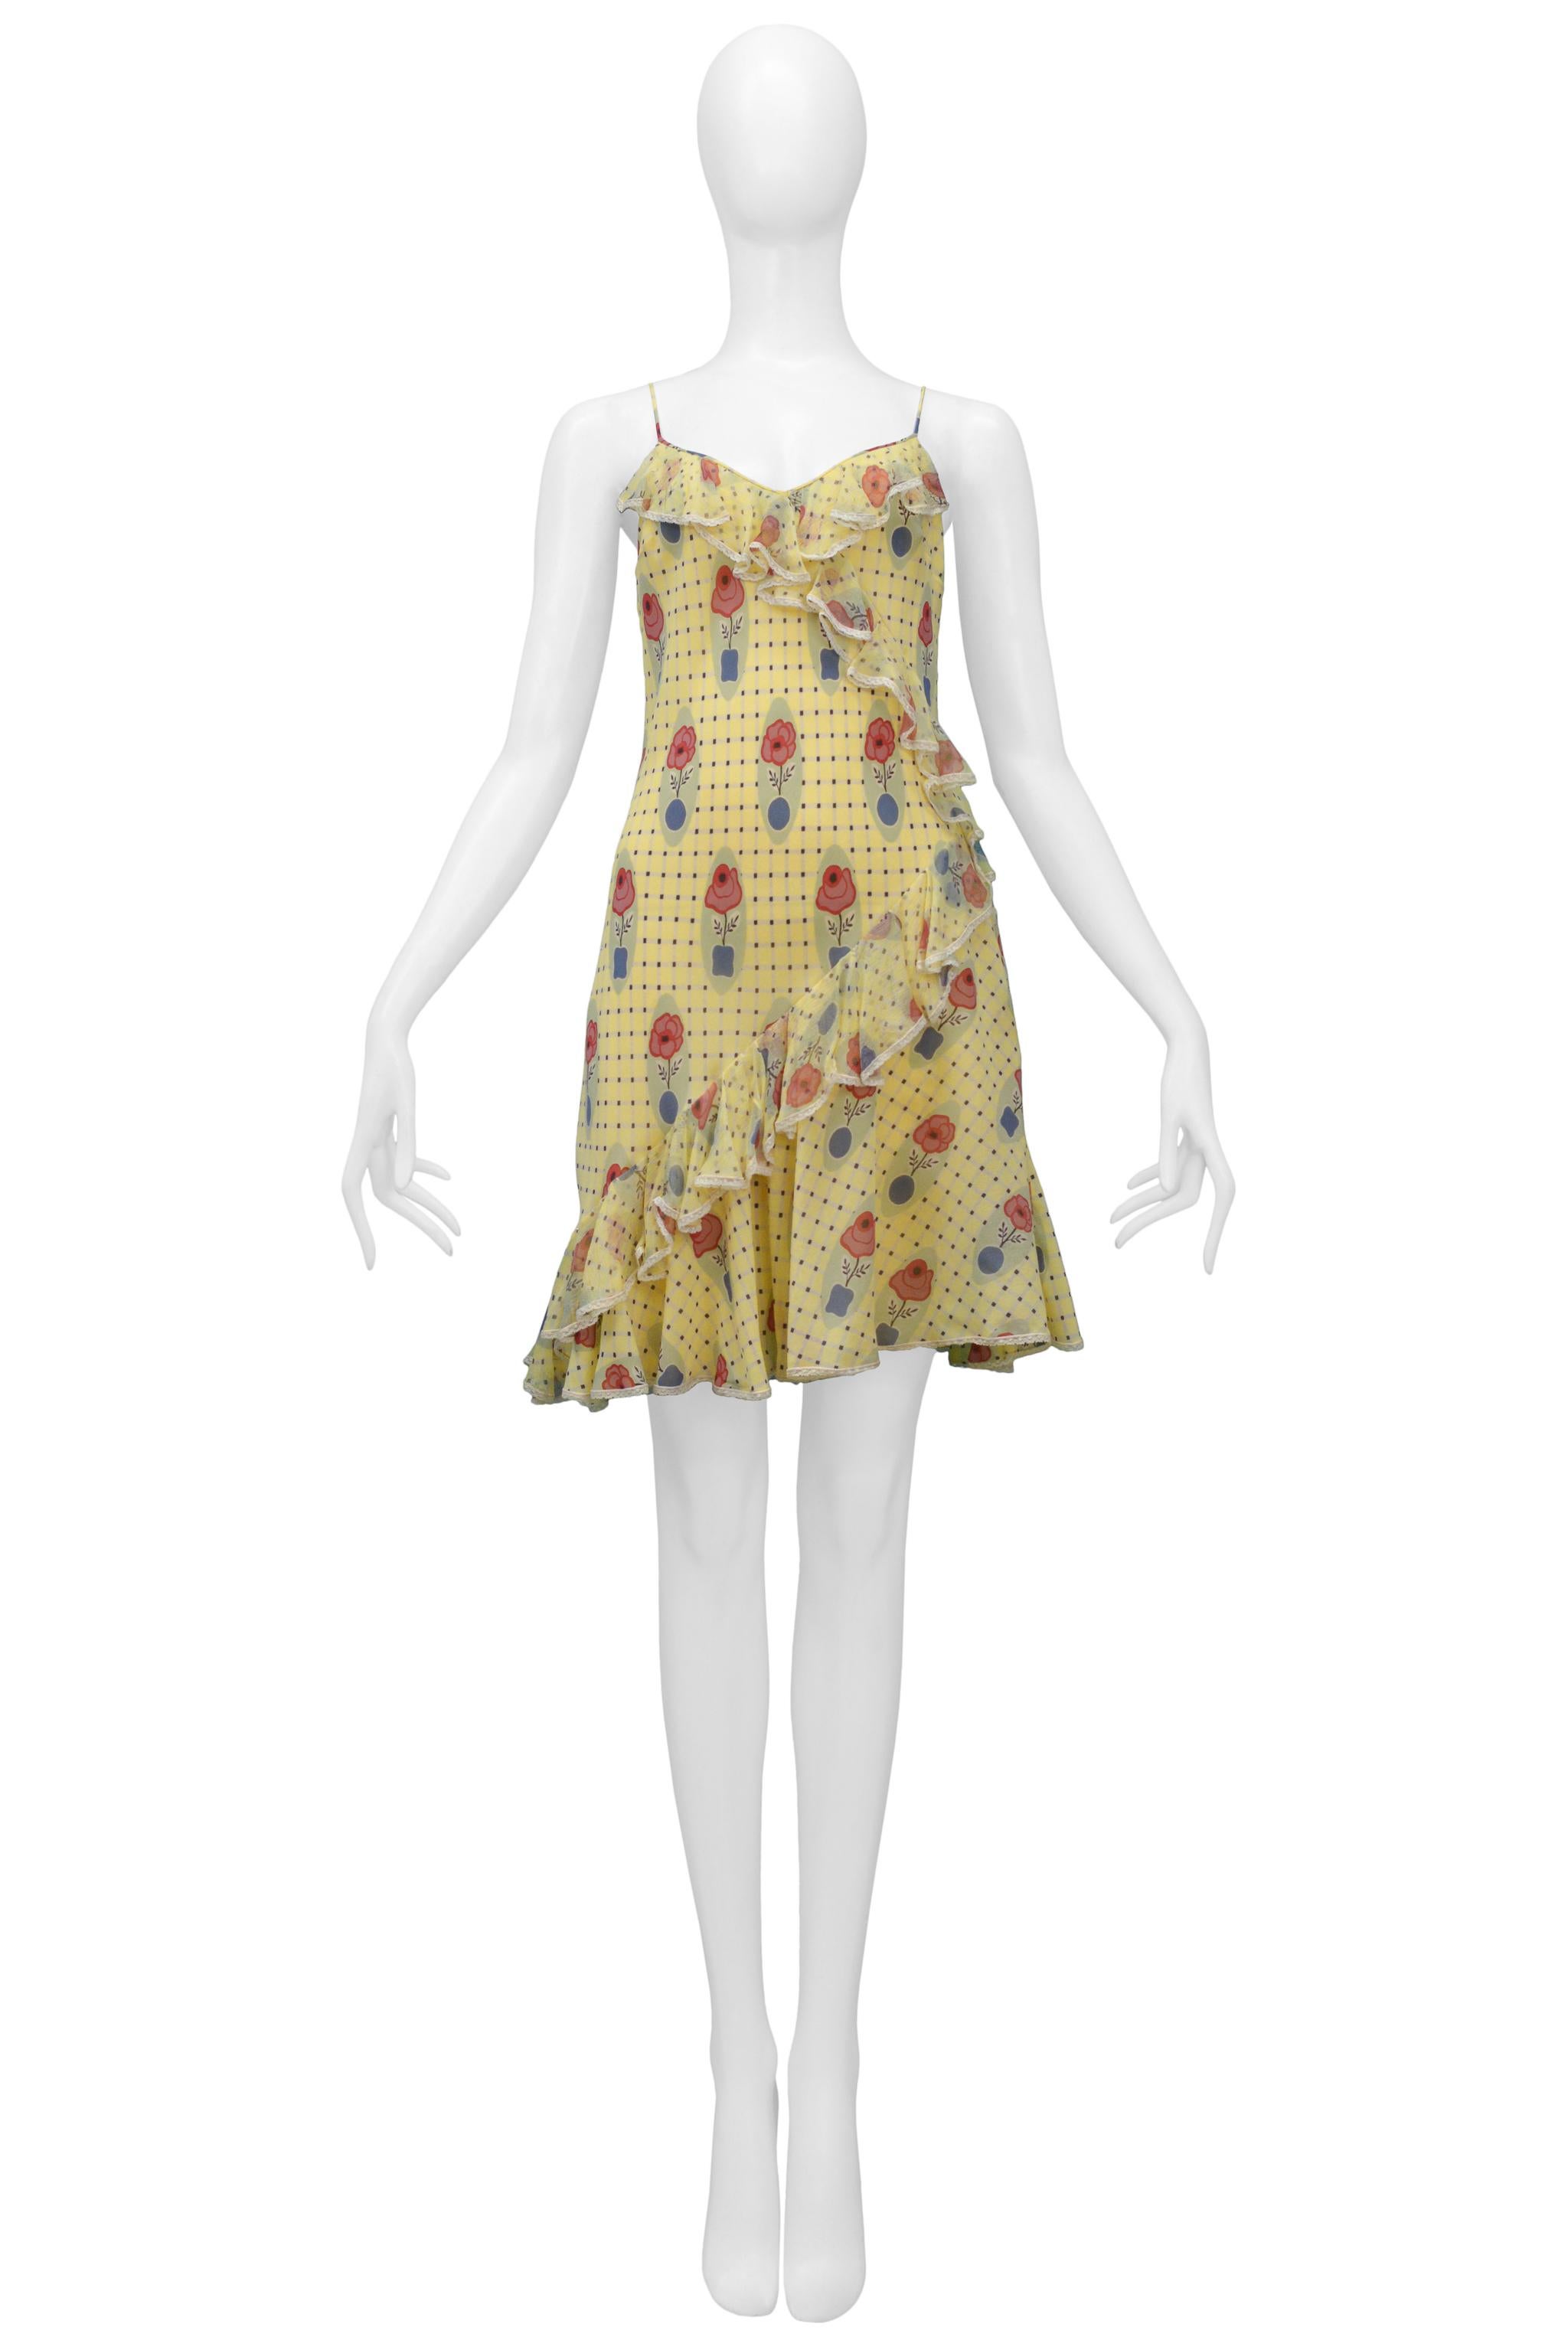 Resurrection Vintage is pleased to offer a vintage John Galliano yellow slip dress featuring a check print with potted flowers, ruffles along the front and back of the dress, and white lace trim

John Galliano 
Size 42
100% Silk 
Excellent Vintage